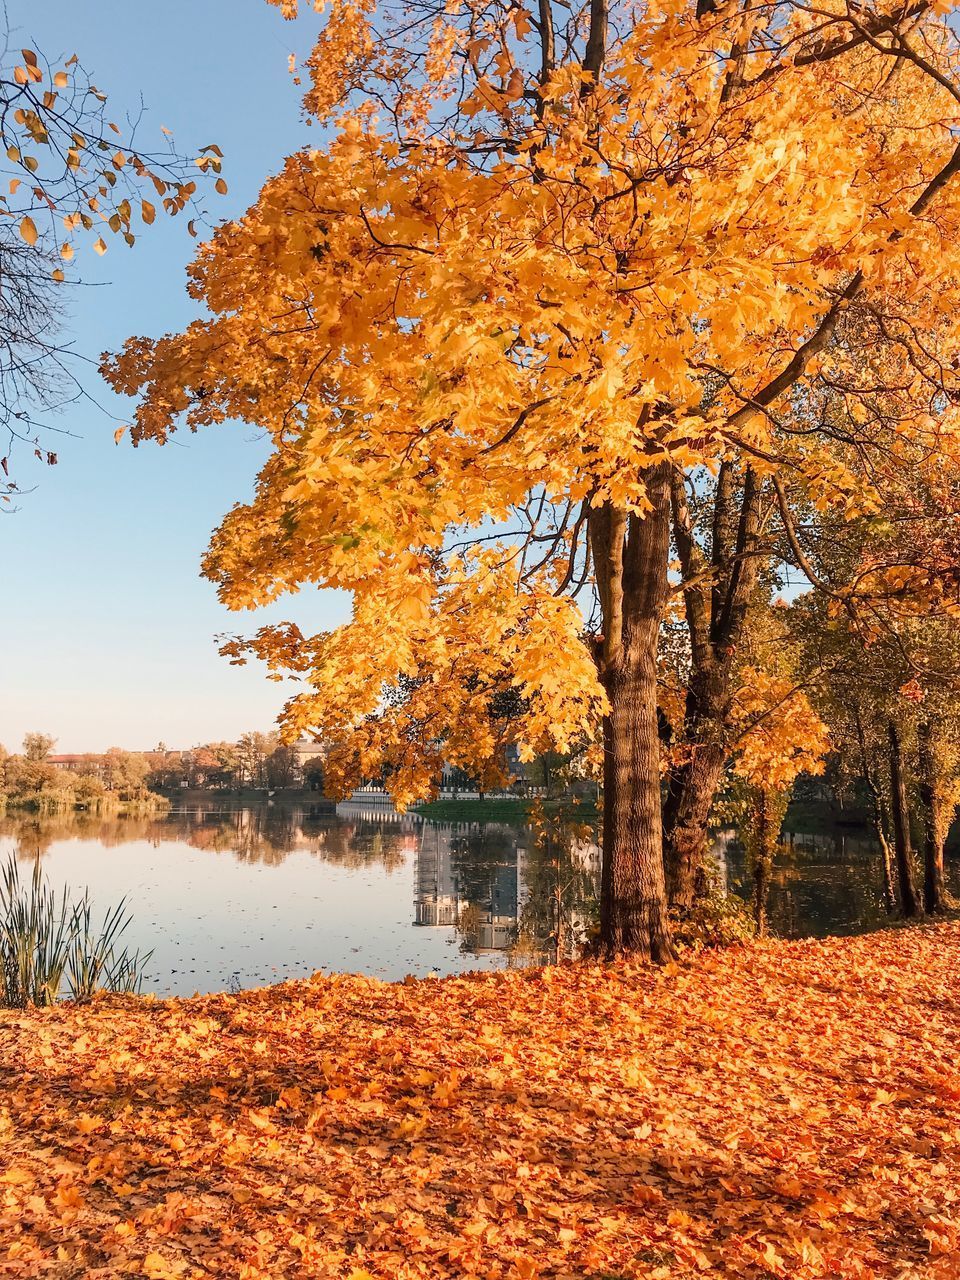 VIEW OF AUTUMNAL TREES BY LAKE